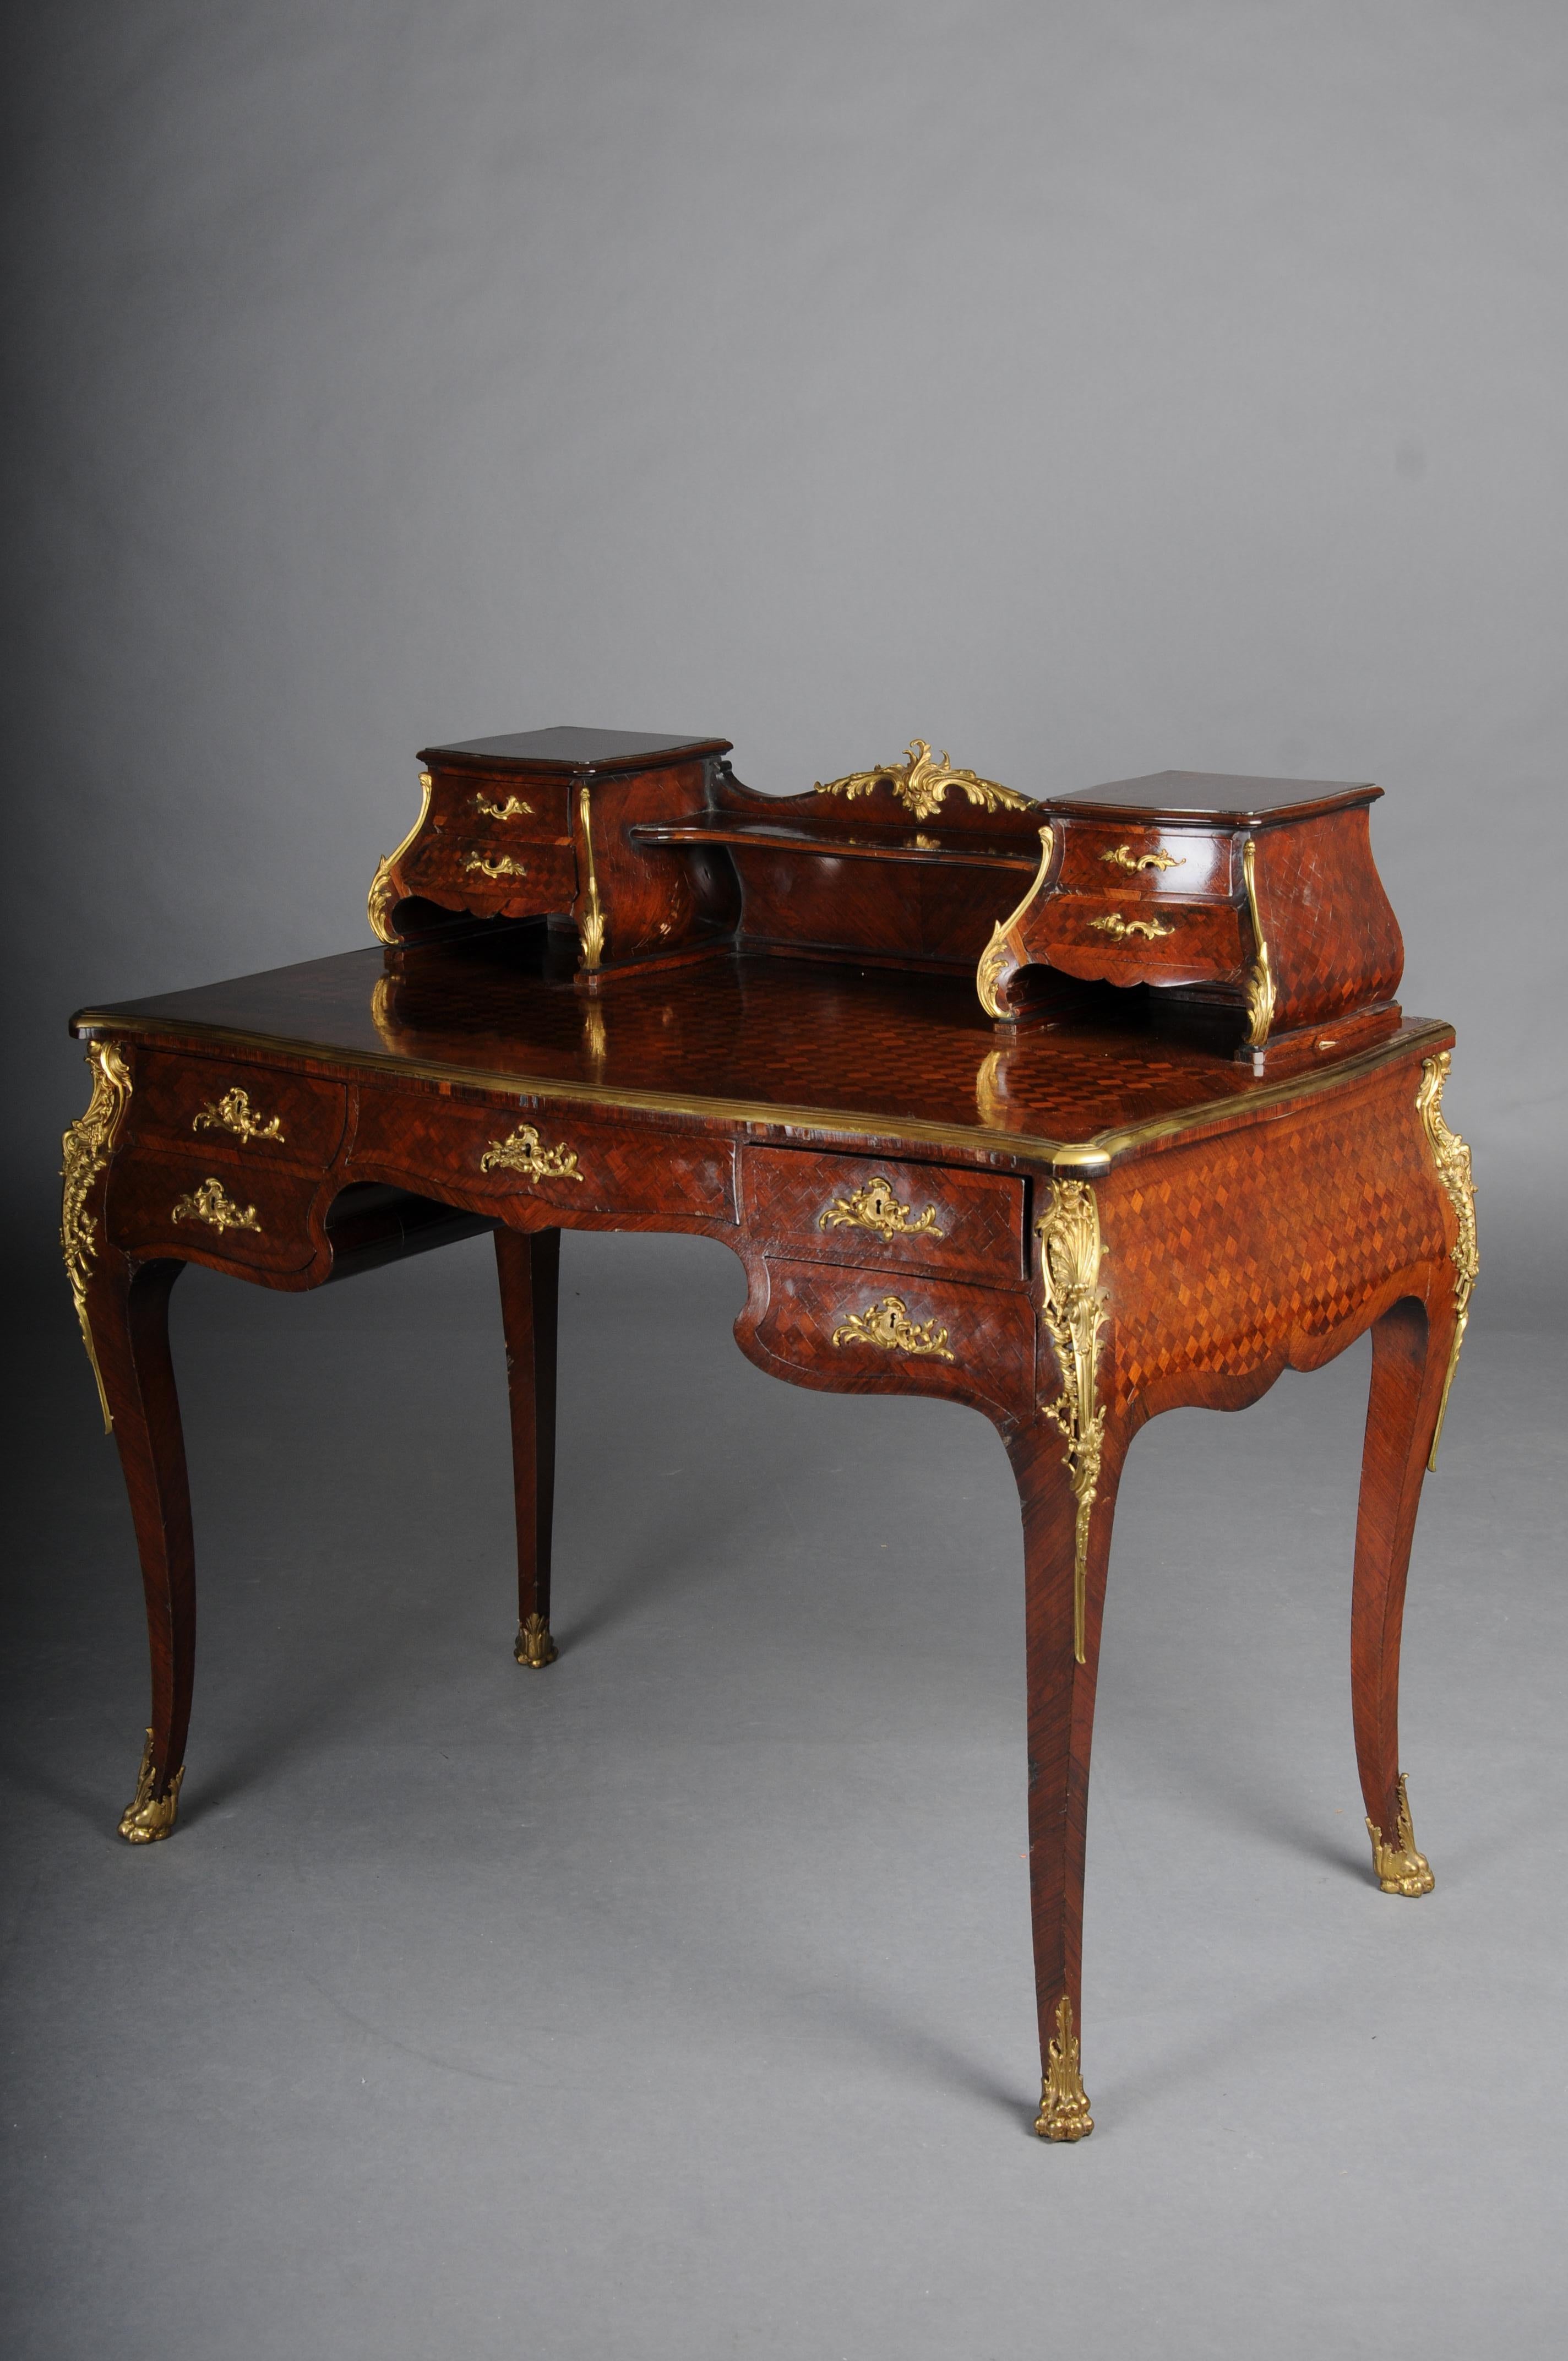 Courtly ladies' secretary signed F. Linke around 1880 Paris

Solid oak wood veneered with fine veneer and packaged over a wide area.

Fire-gilded and finely chased bronze and cambered.